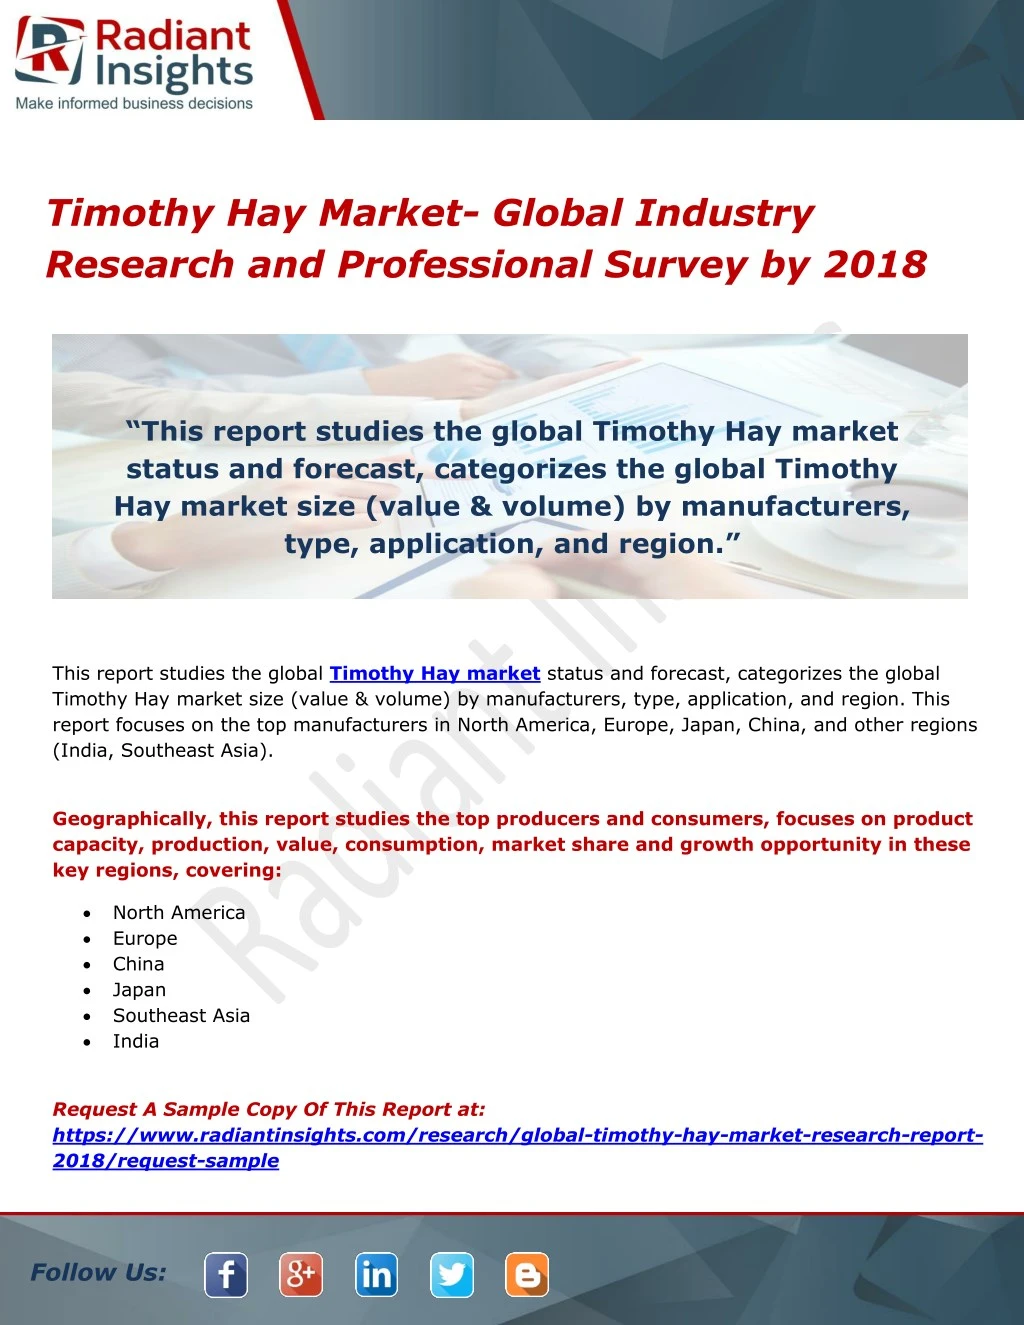 timothy hay market global industry research